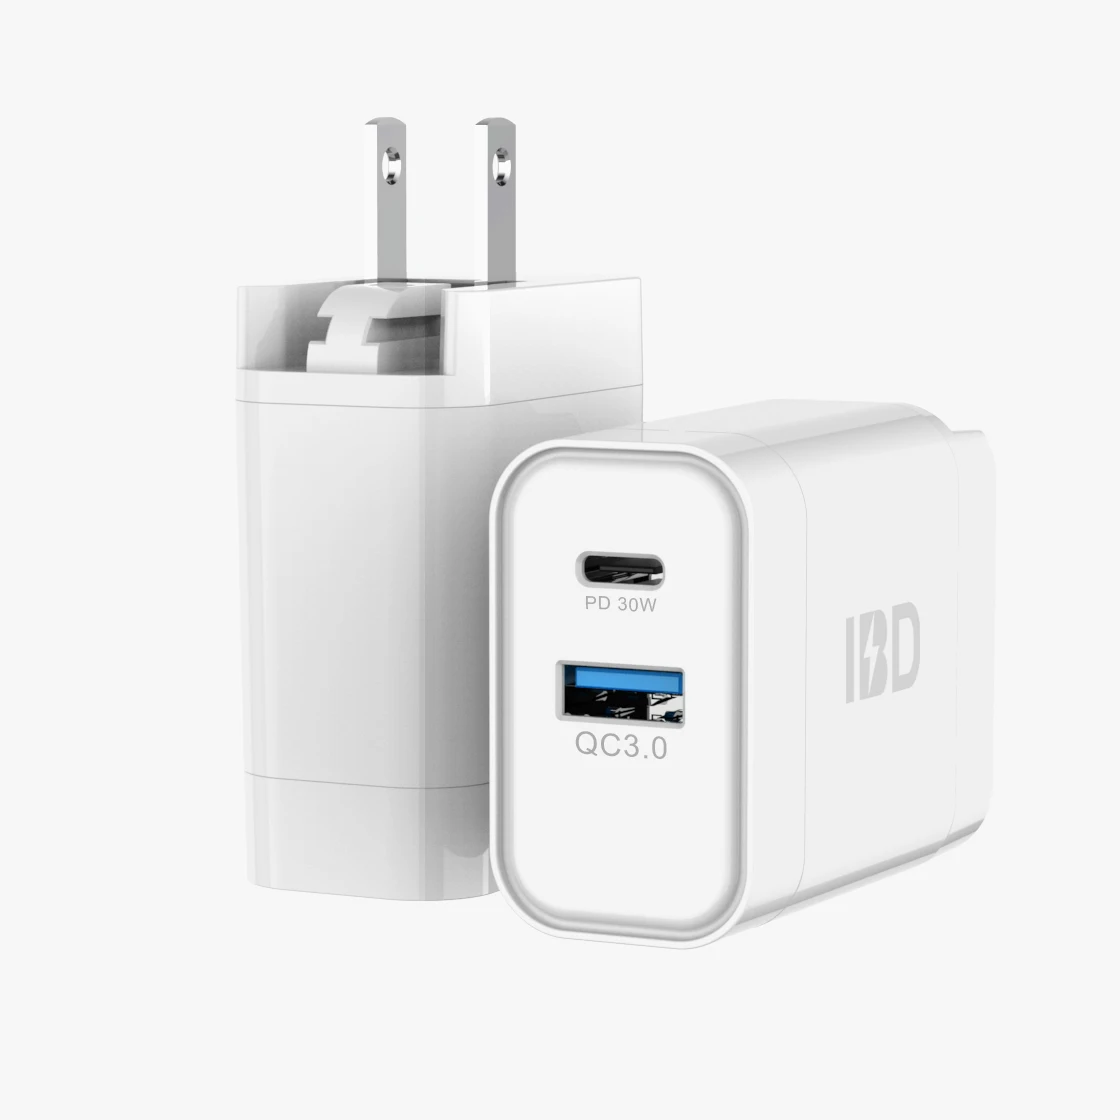 

IBD 2020 New Wall Charger Dual USB Port 18W, Qc 3.0 Fast Charge For Mobile Phone PD 30W Usb Wall Charger